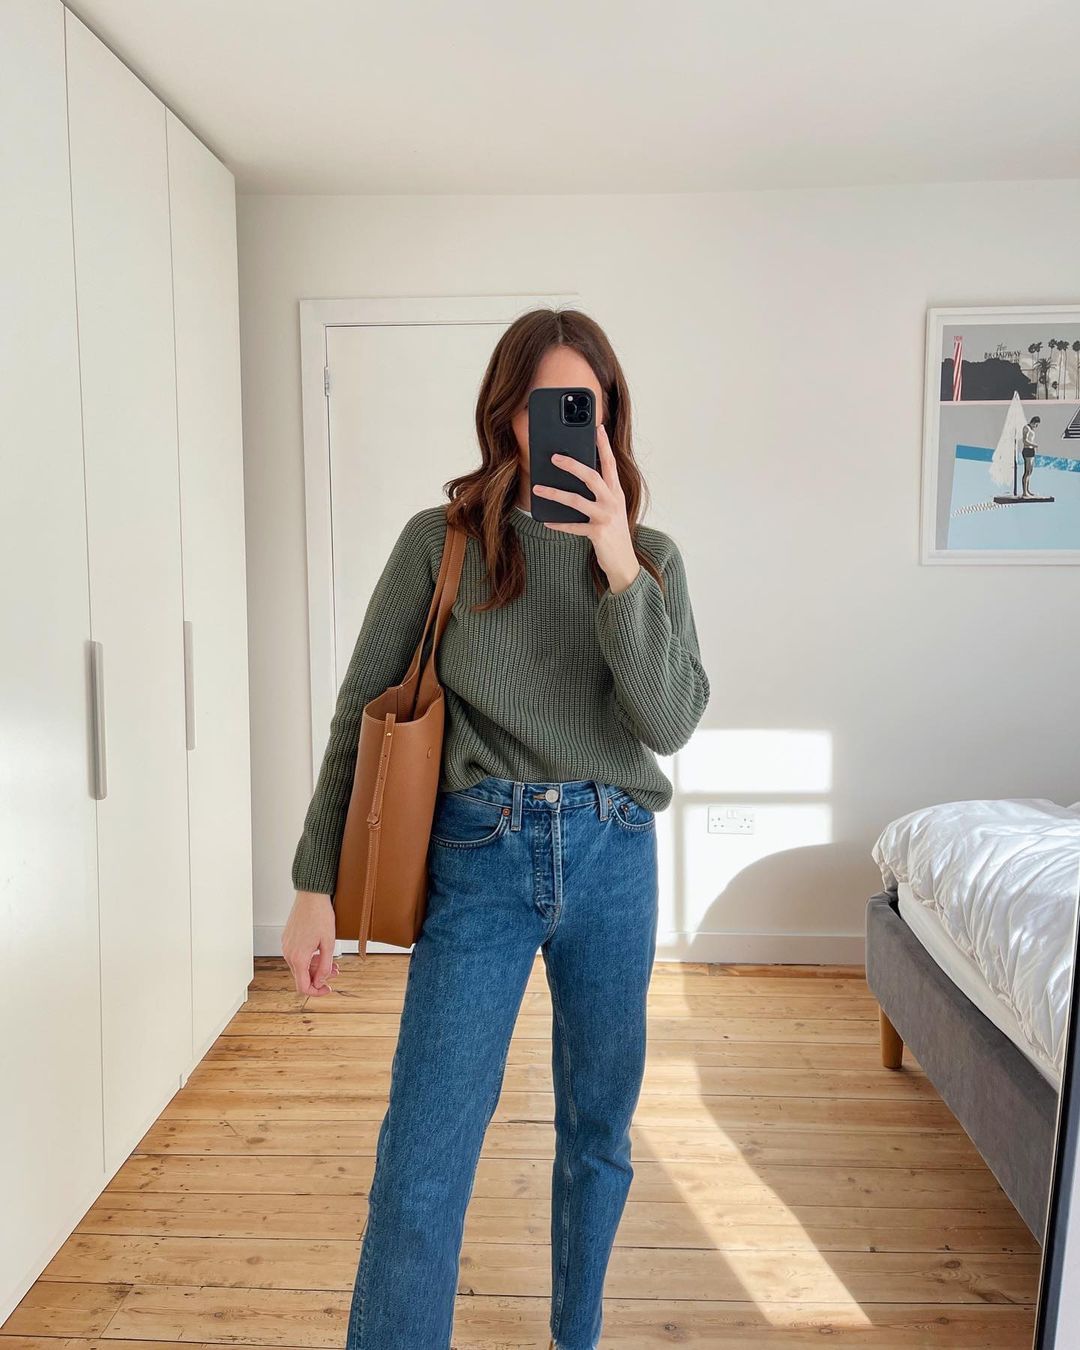 Basic High-waisted Jeans Outfit Ideas For Spring 2021